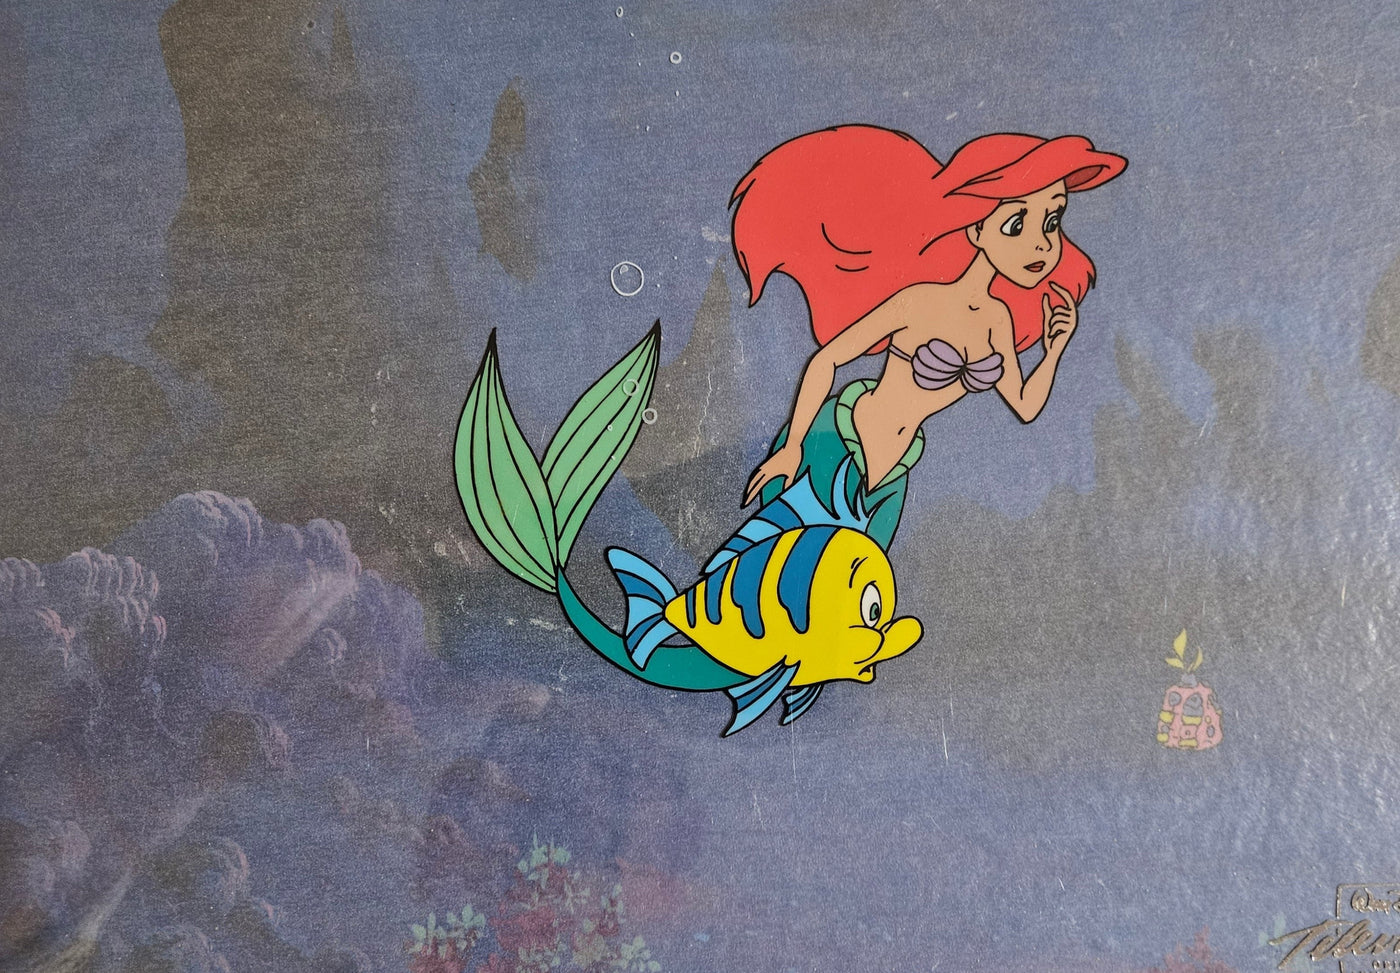 Original Walt Disney Television Production Cel from Disney's The Little Mermaid featuring Ariel and Flounder